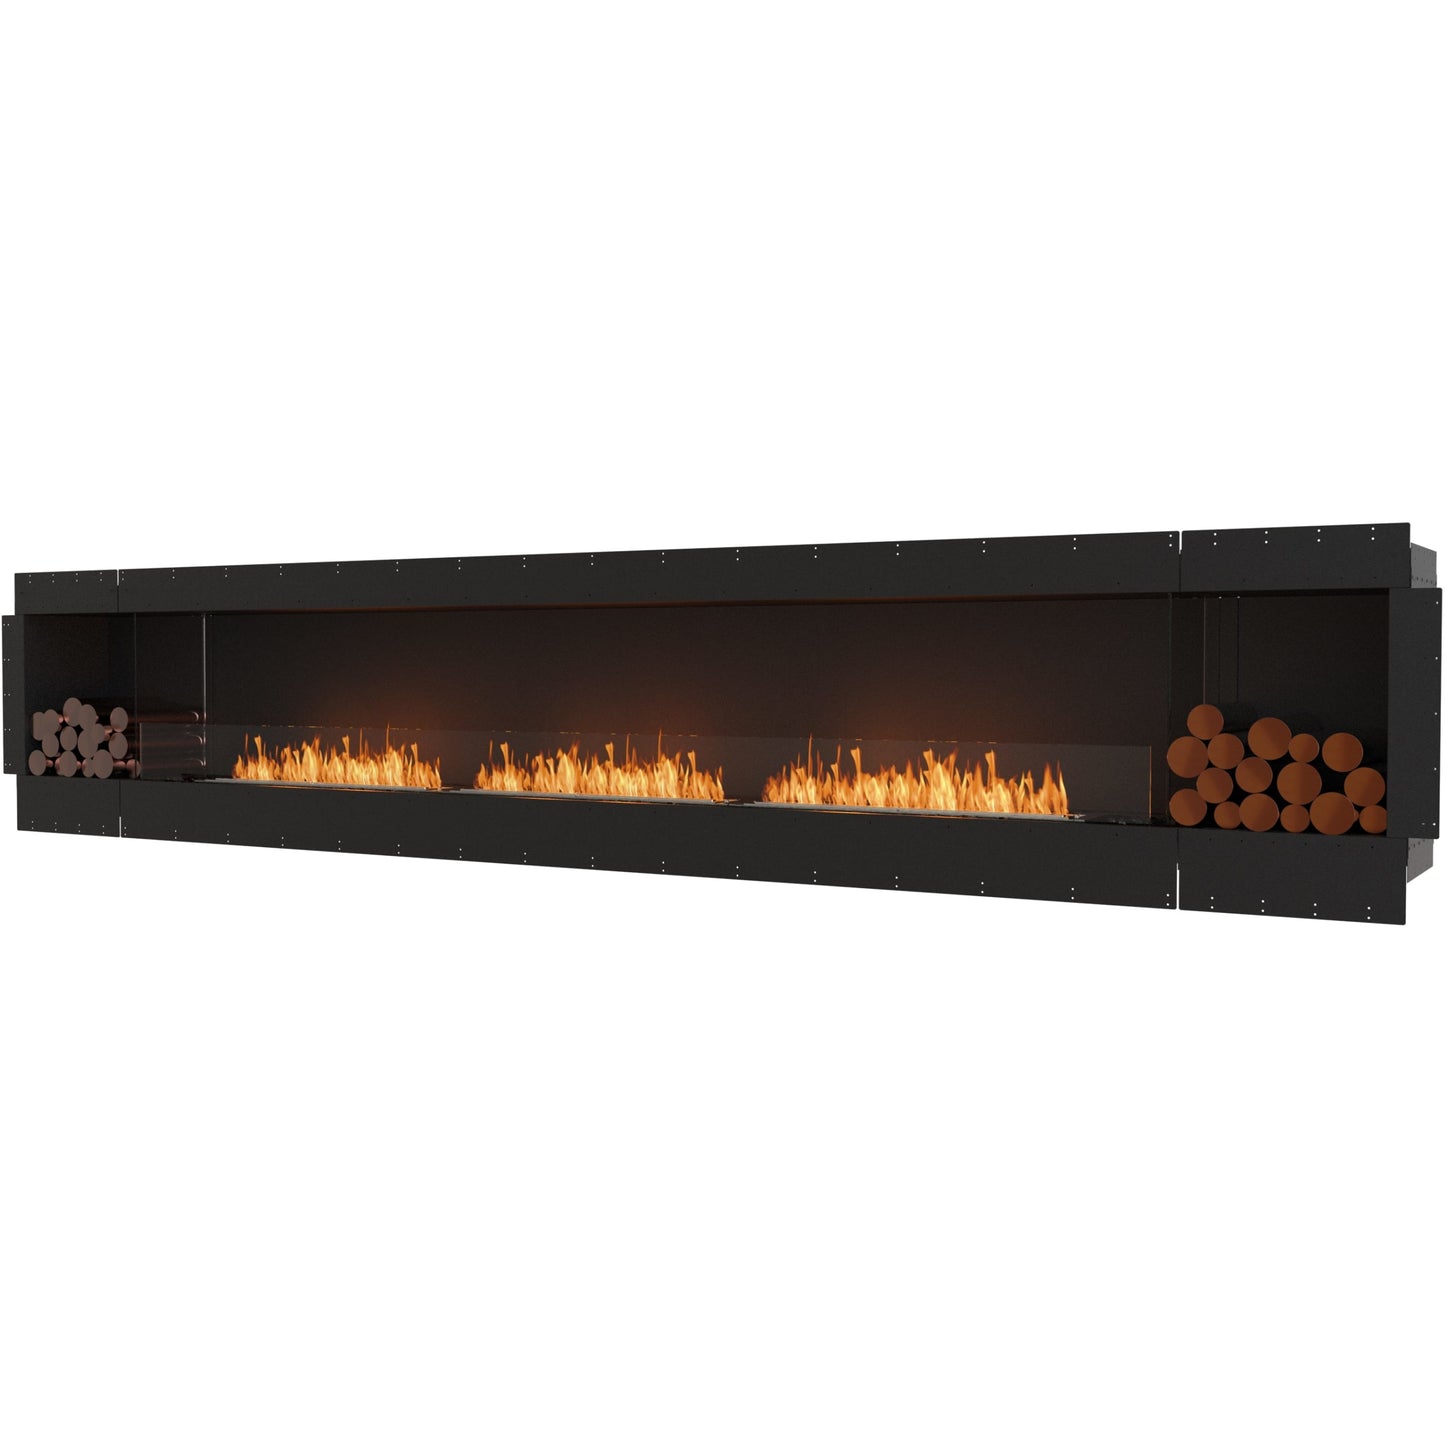 Media wall fire place